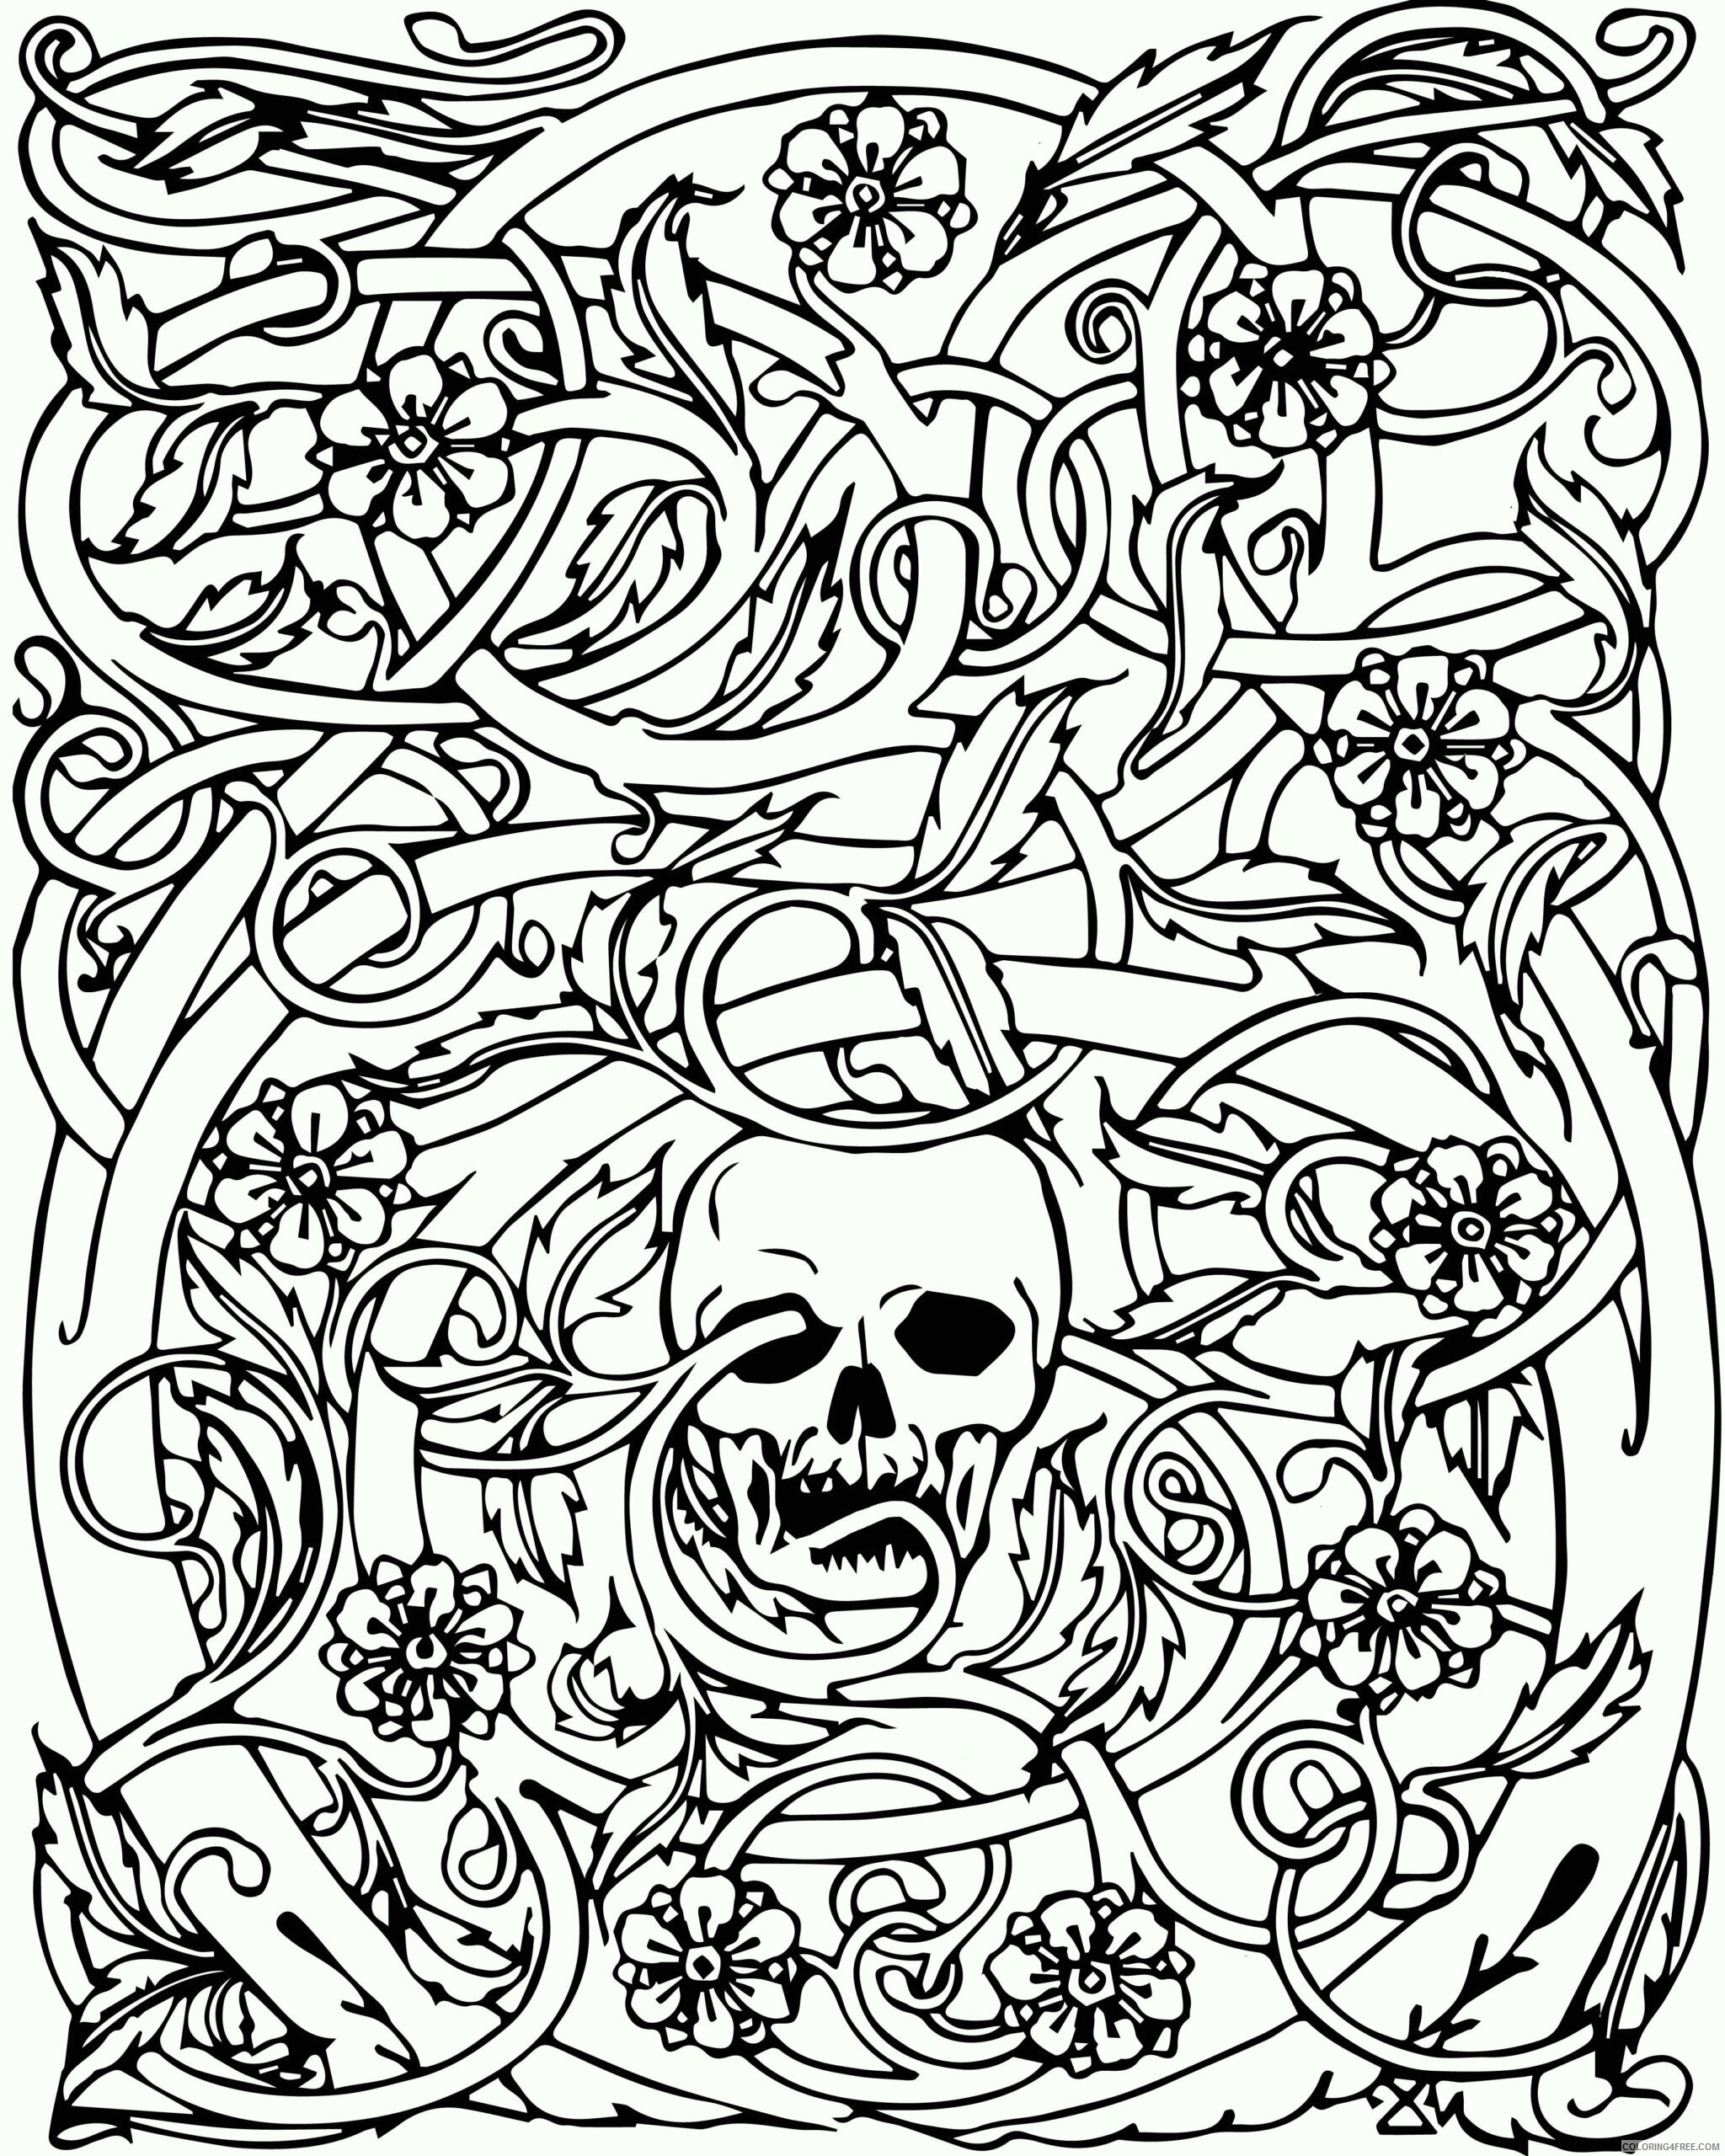 Adult Coloring Pages Skull Printable Sheets Free Spiral Design To Color 2021 a 2113 Coloring4free